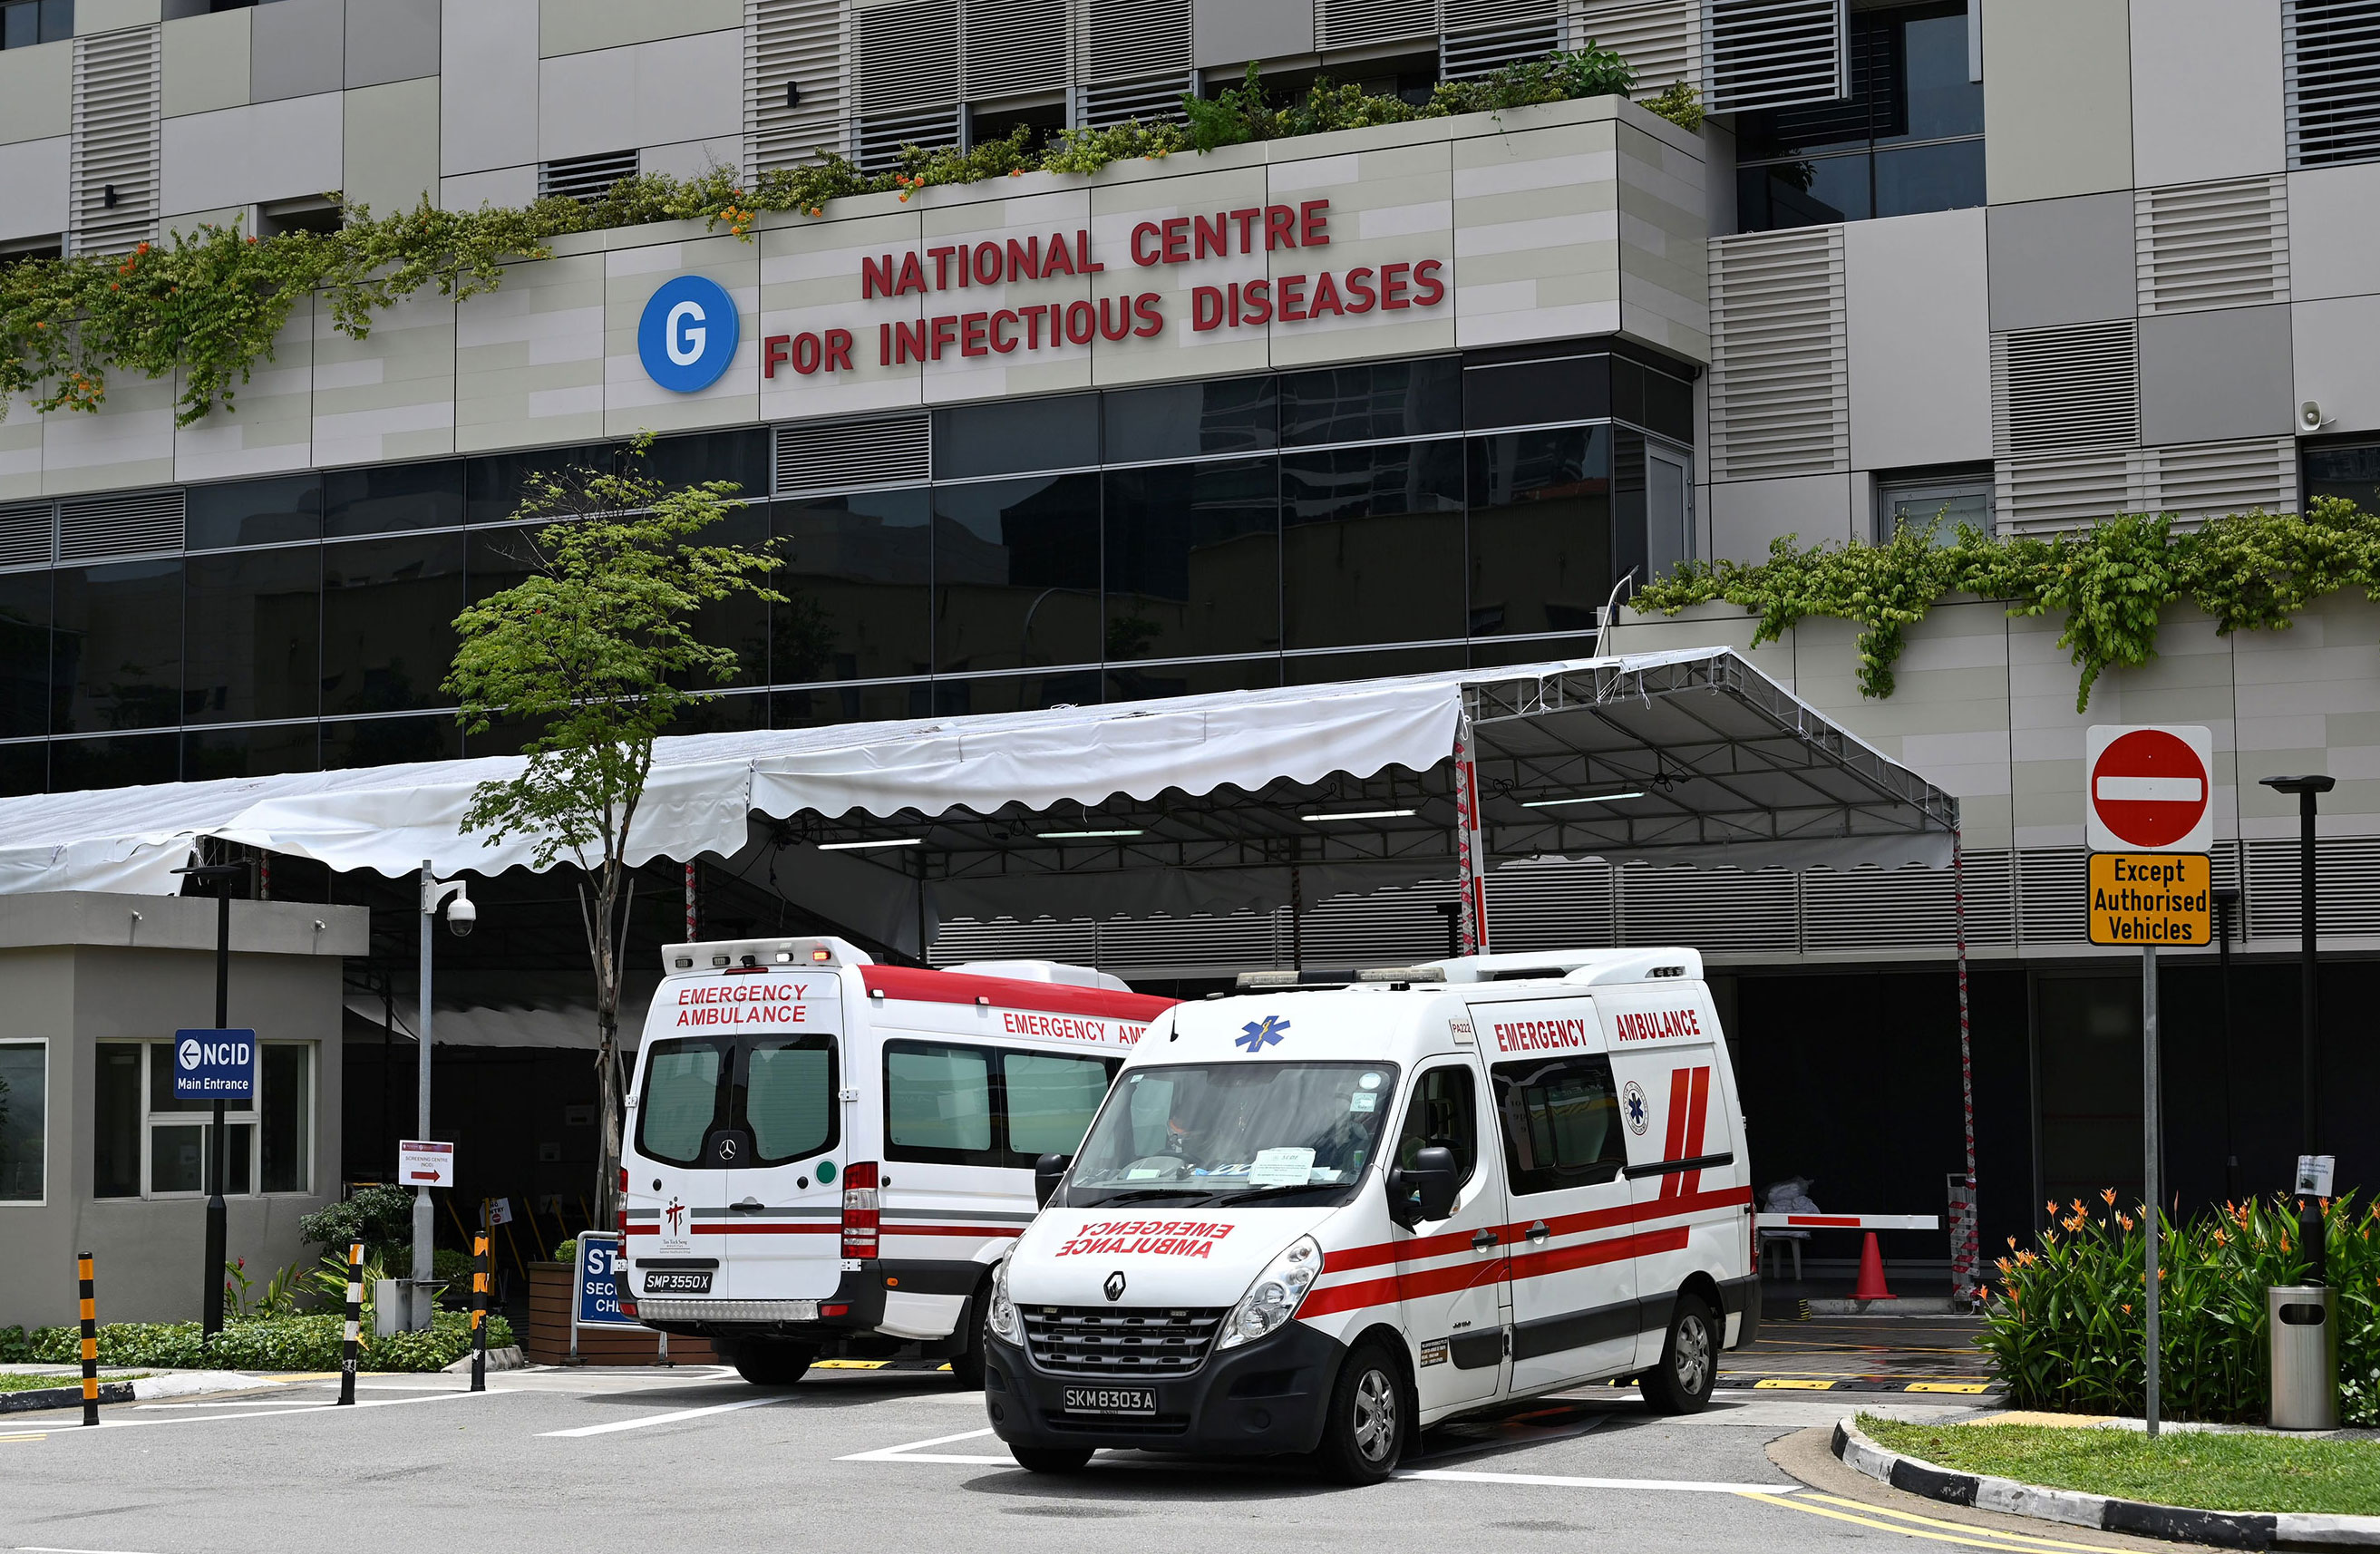 Ambulances sit in front of the National Center for Infectious Diseases, where coronavirus patients are being cared for, in Singapore on April 3.